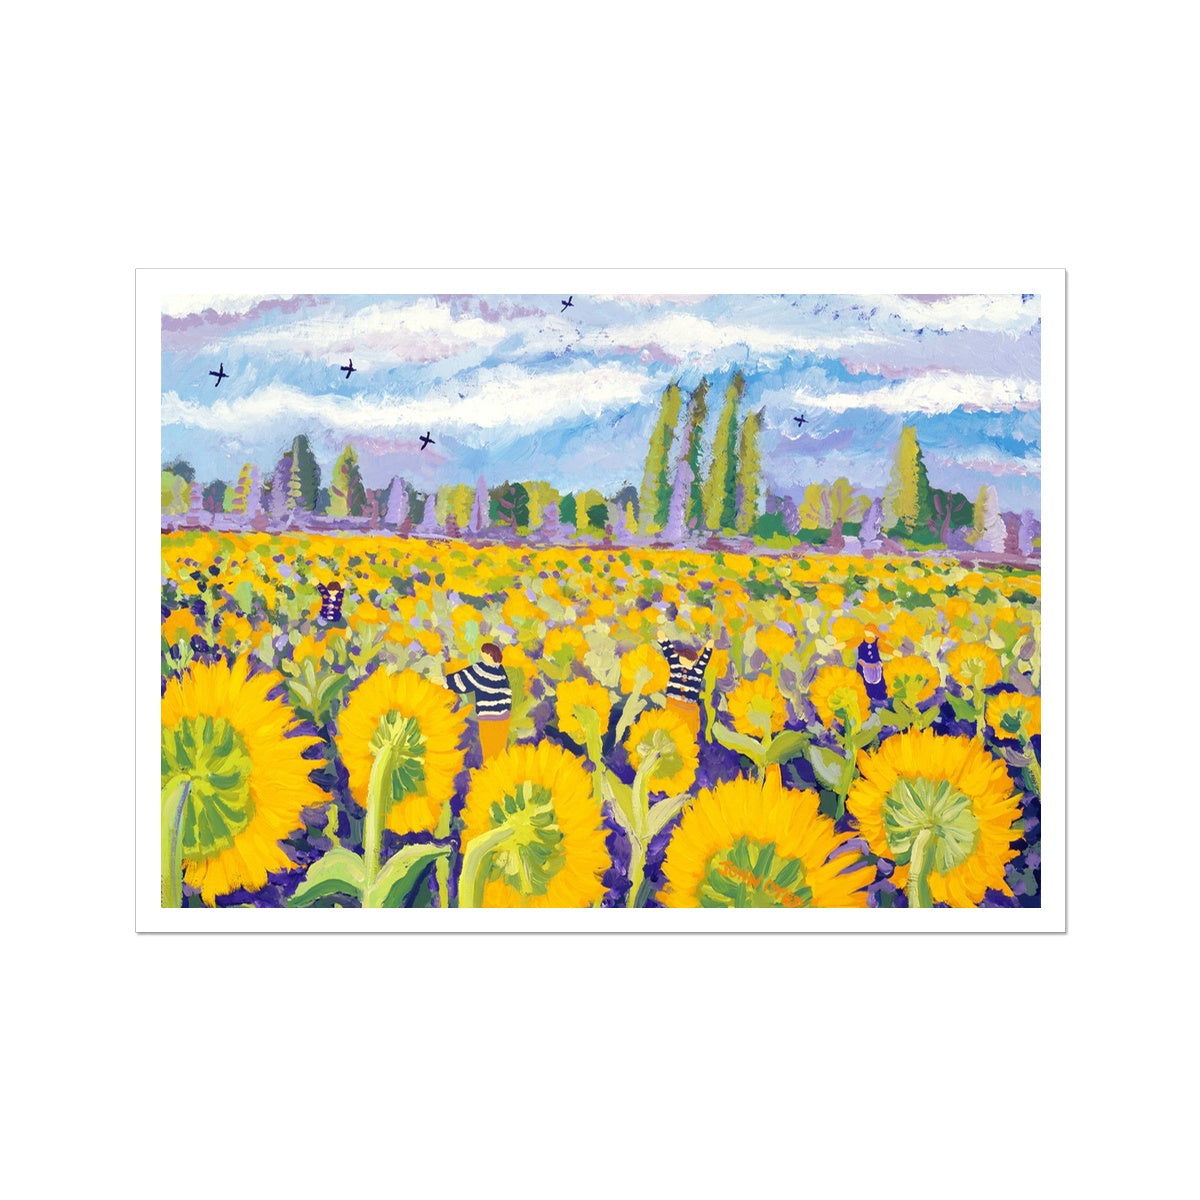 John Dyer Fine Art Print. Open Edition French Art Print. 'Hide and Seek in the Sunflowers'. French sunflower landscape.